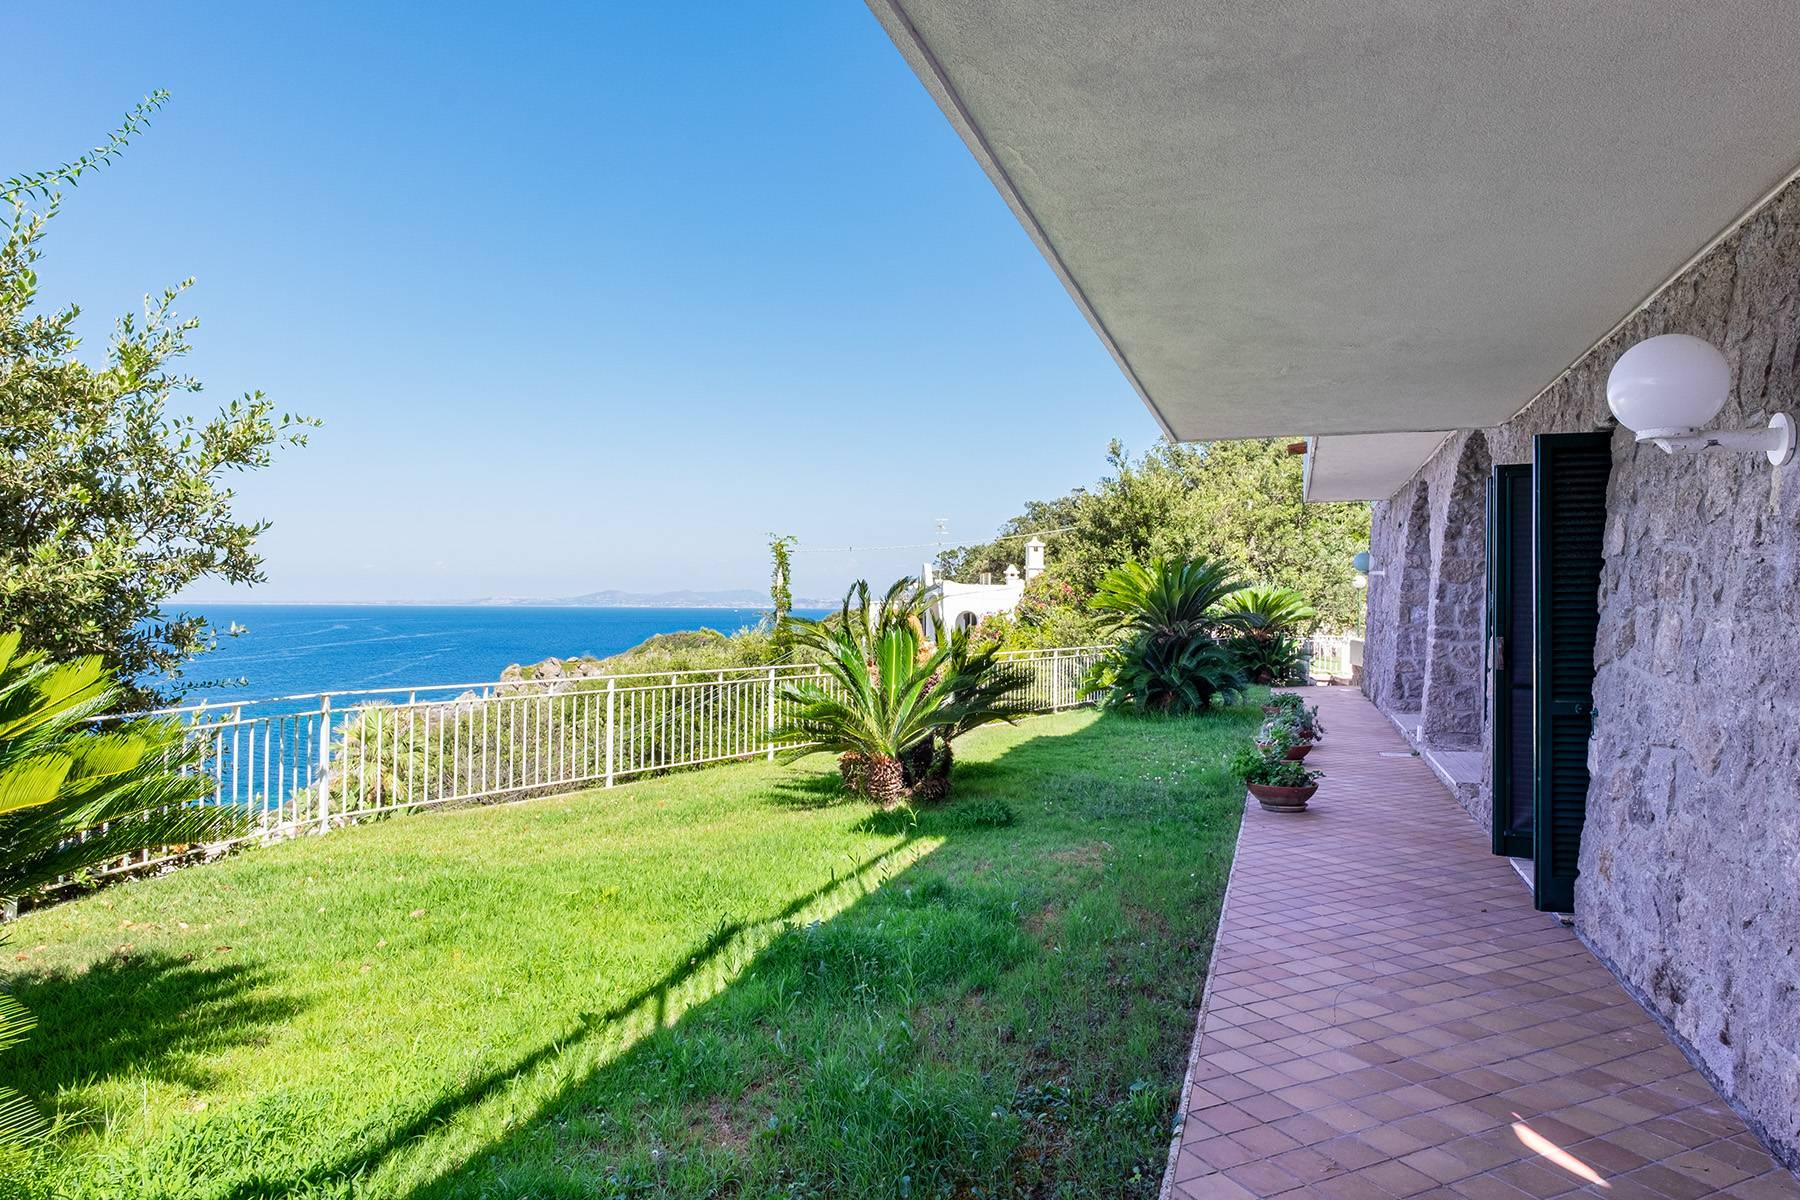 Mediterranean Villa pied dans l'eau with pool and private access to the sea - 22